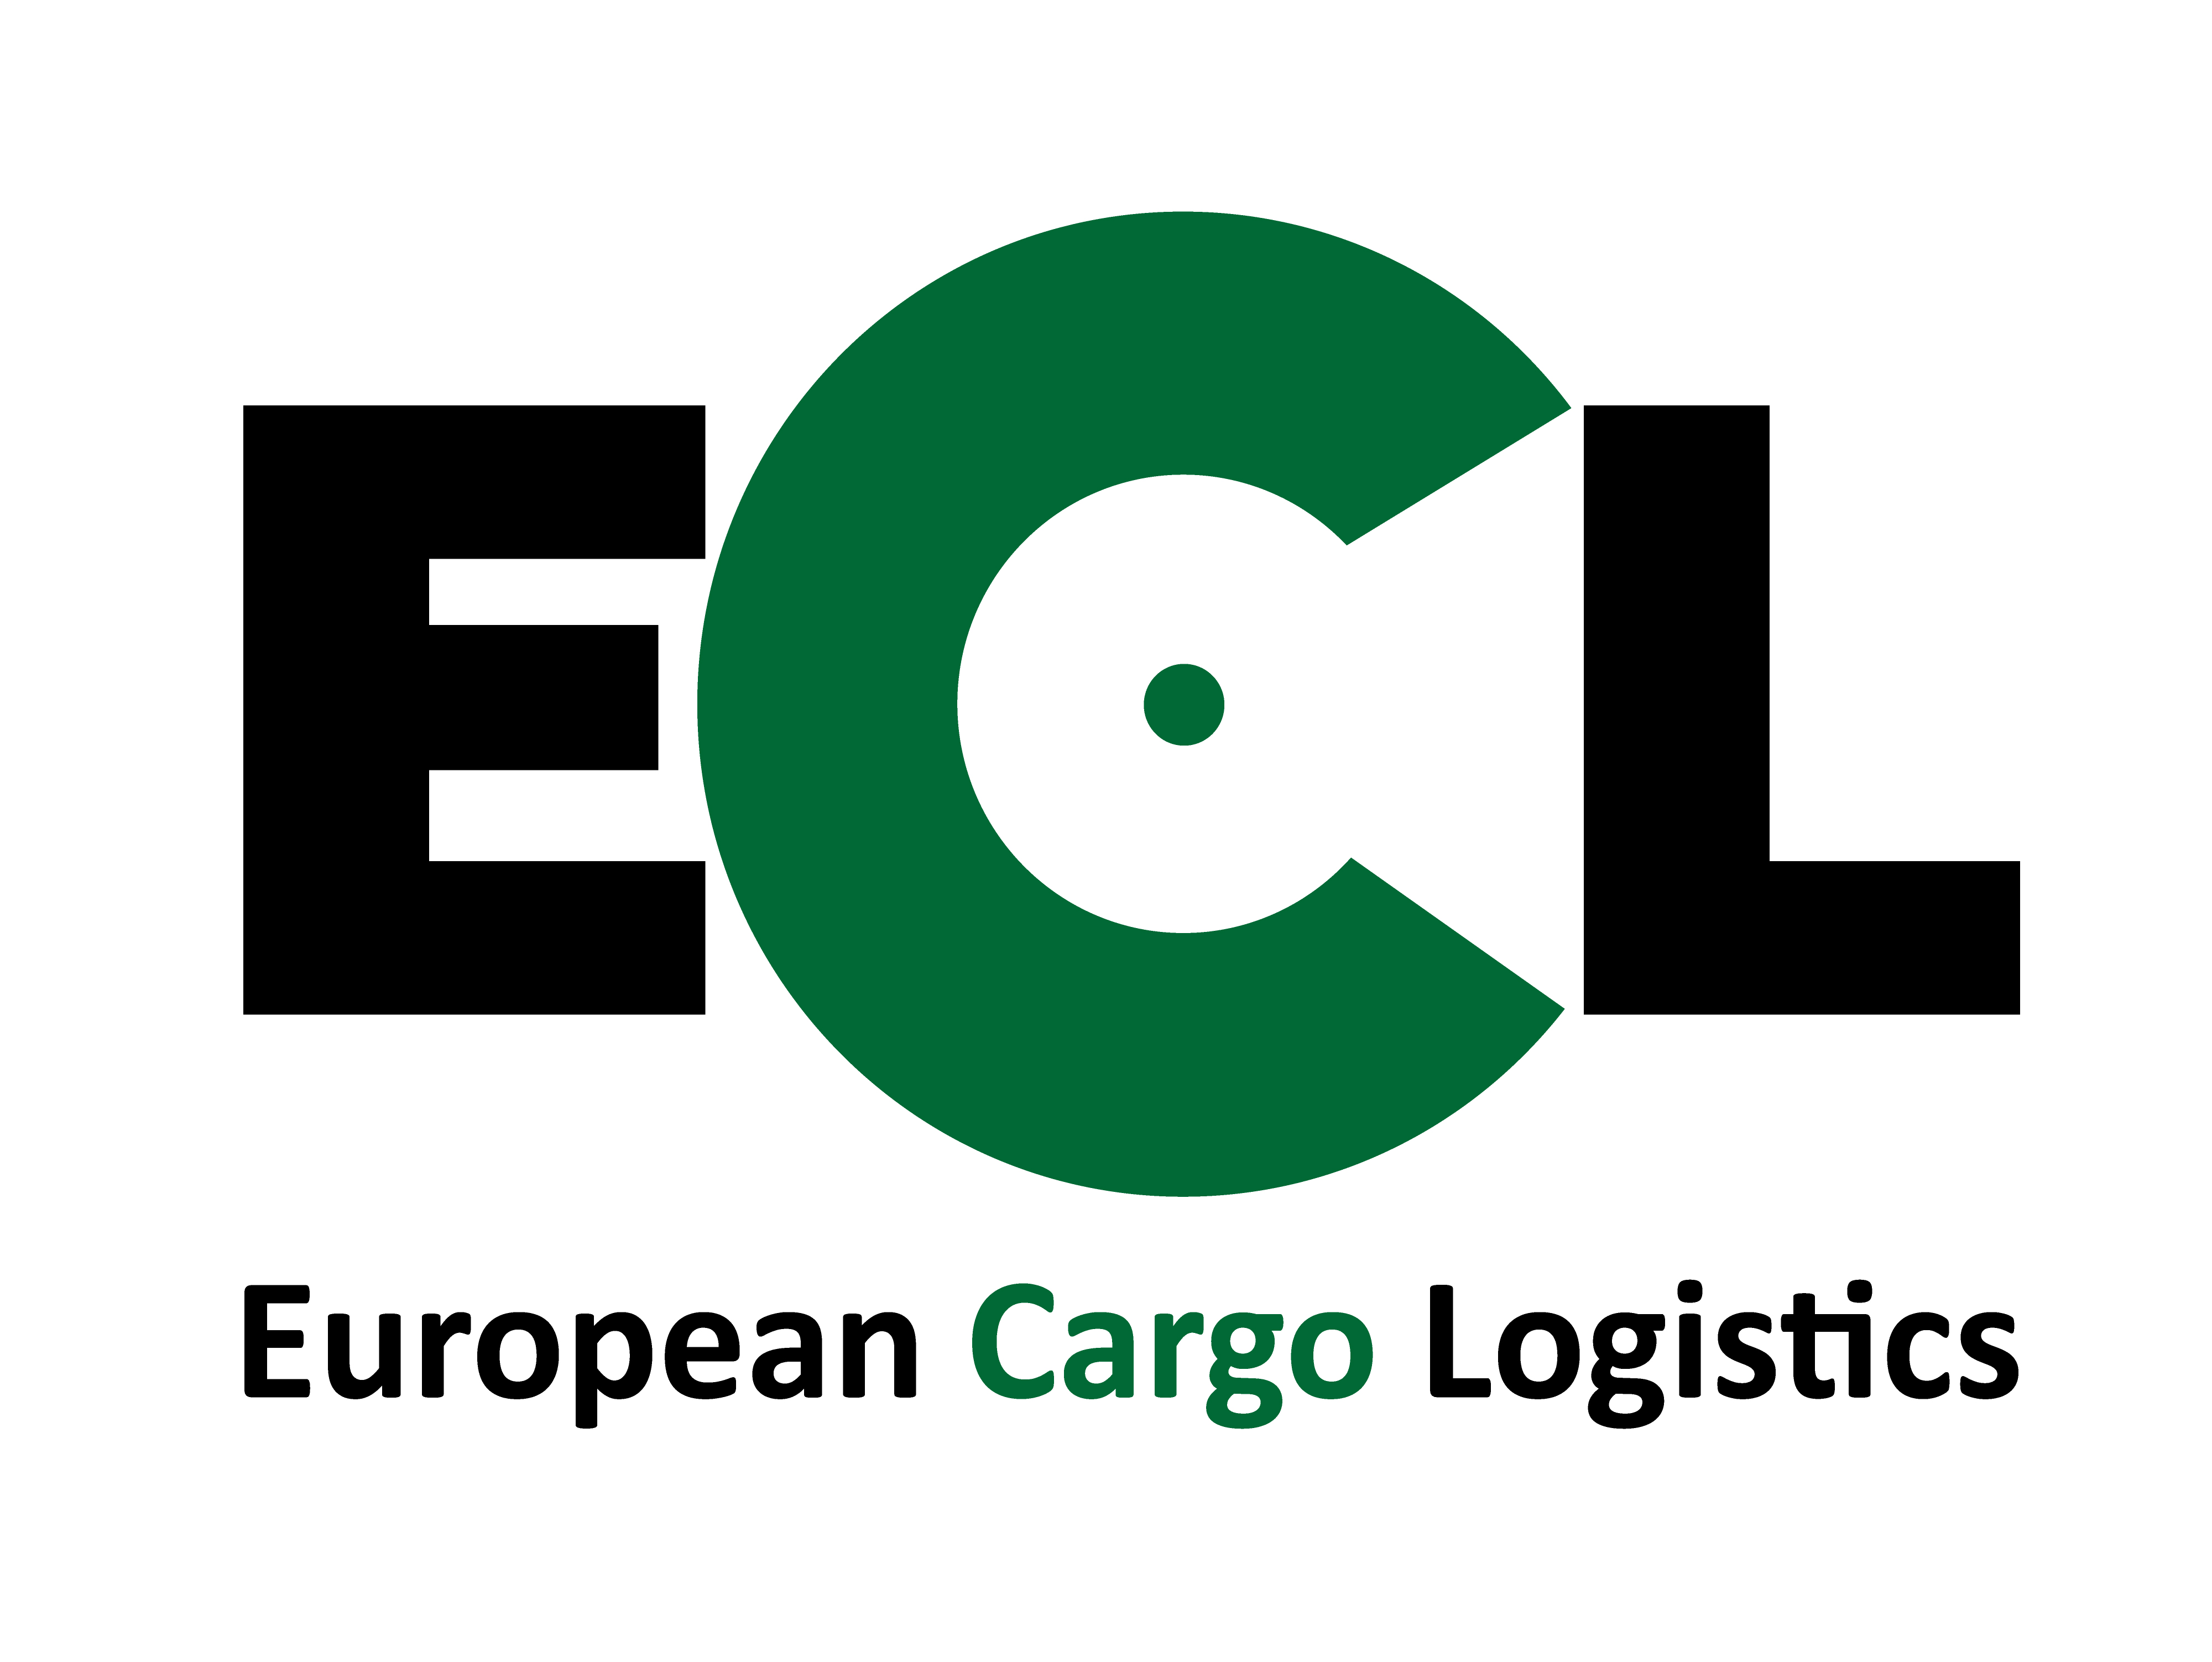 European Cargo Logistics GmbH is looking for reinforcement!